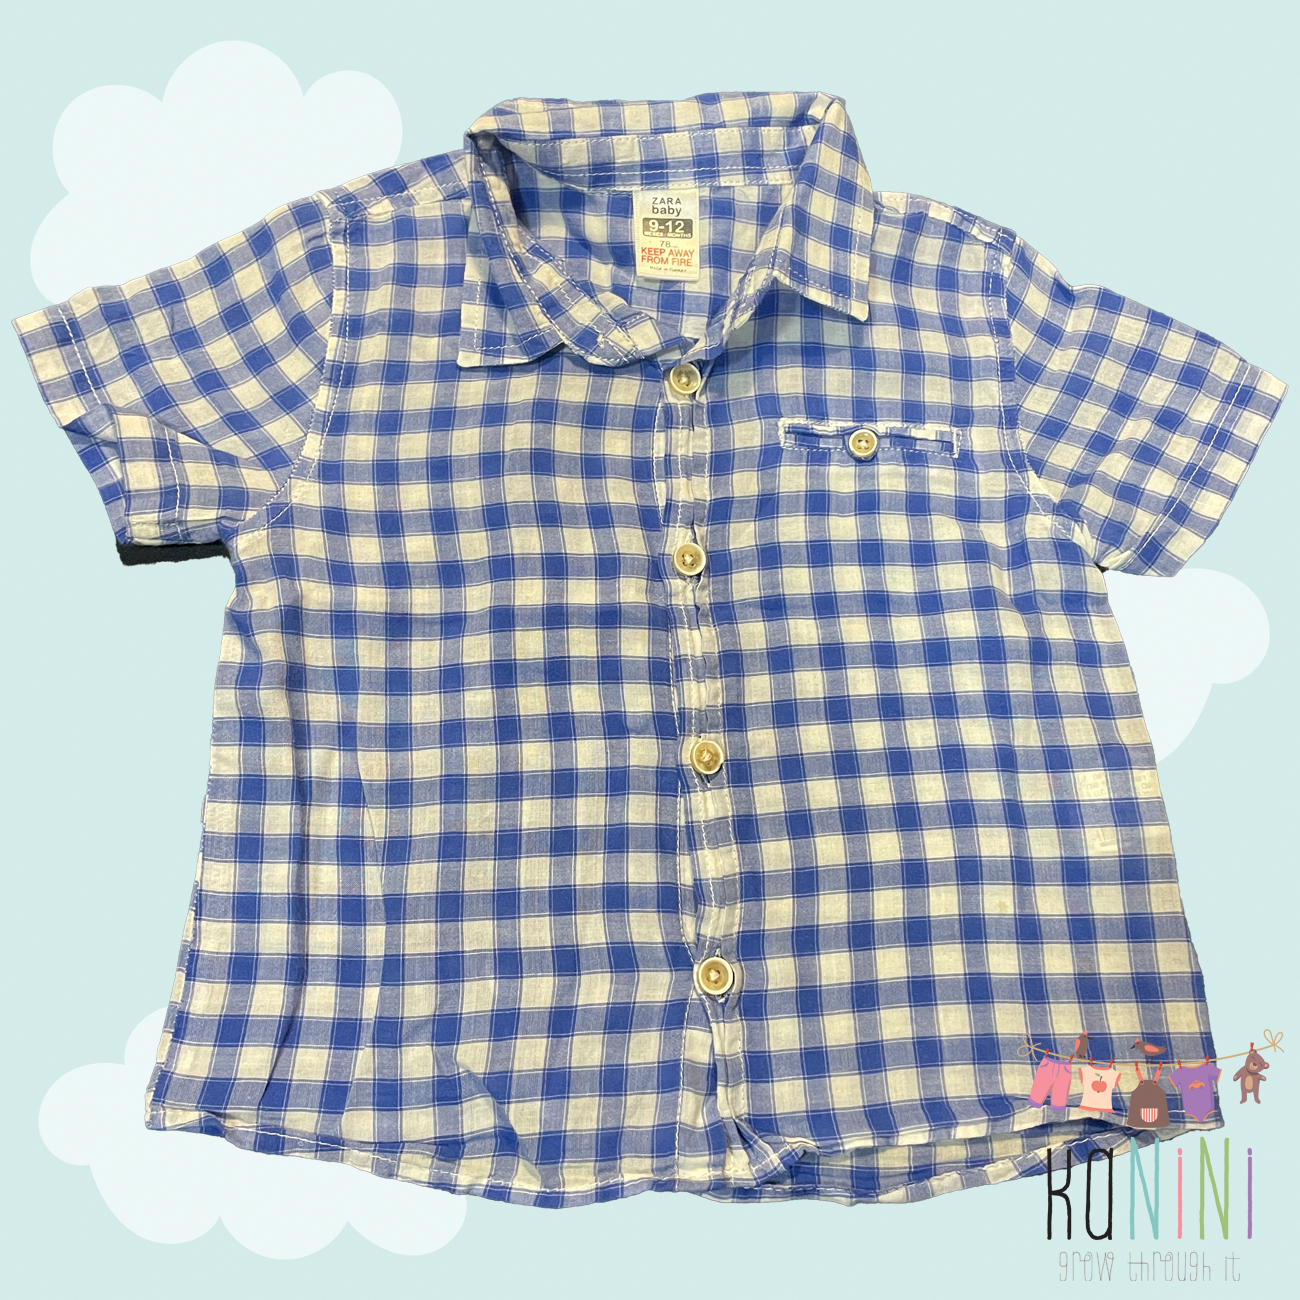 Featured image for “ZARA Baby 9 - 12 Months Boys Blue Check Shirt”